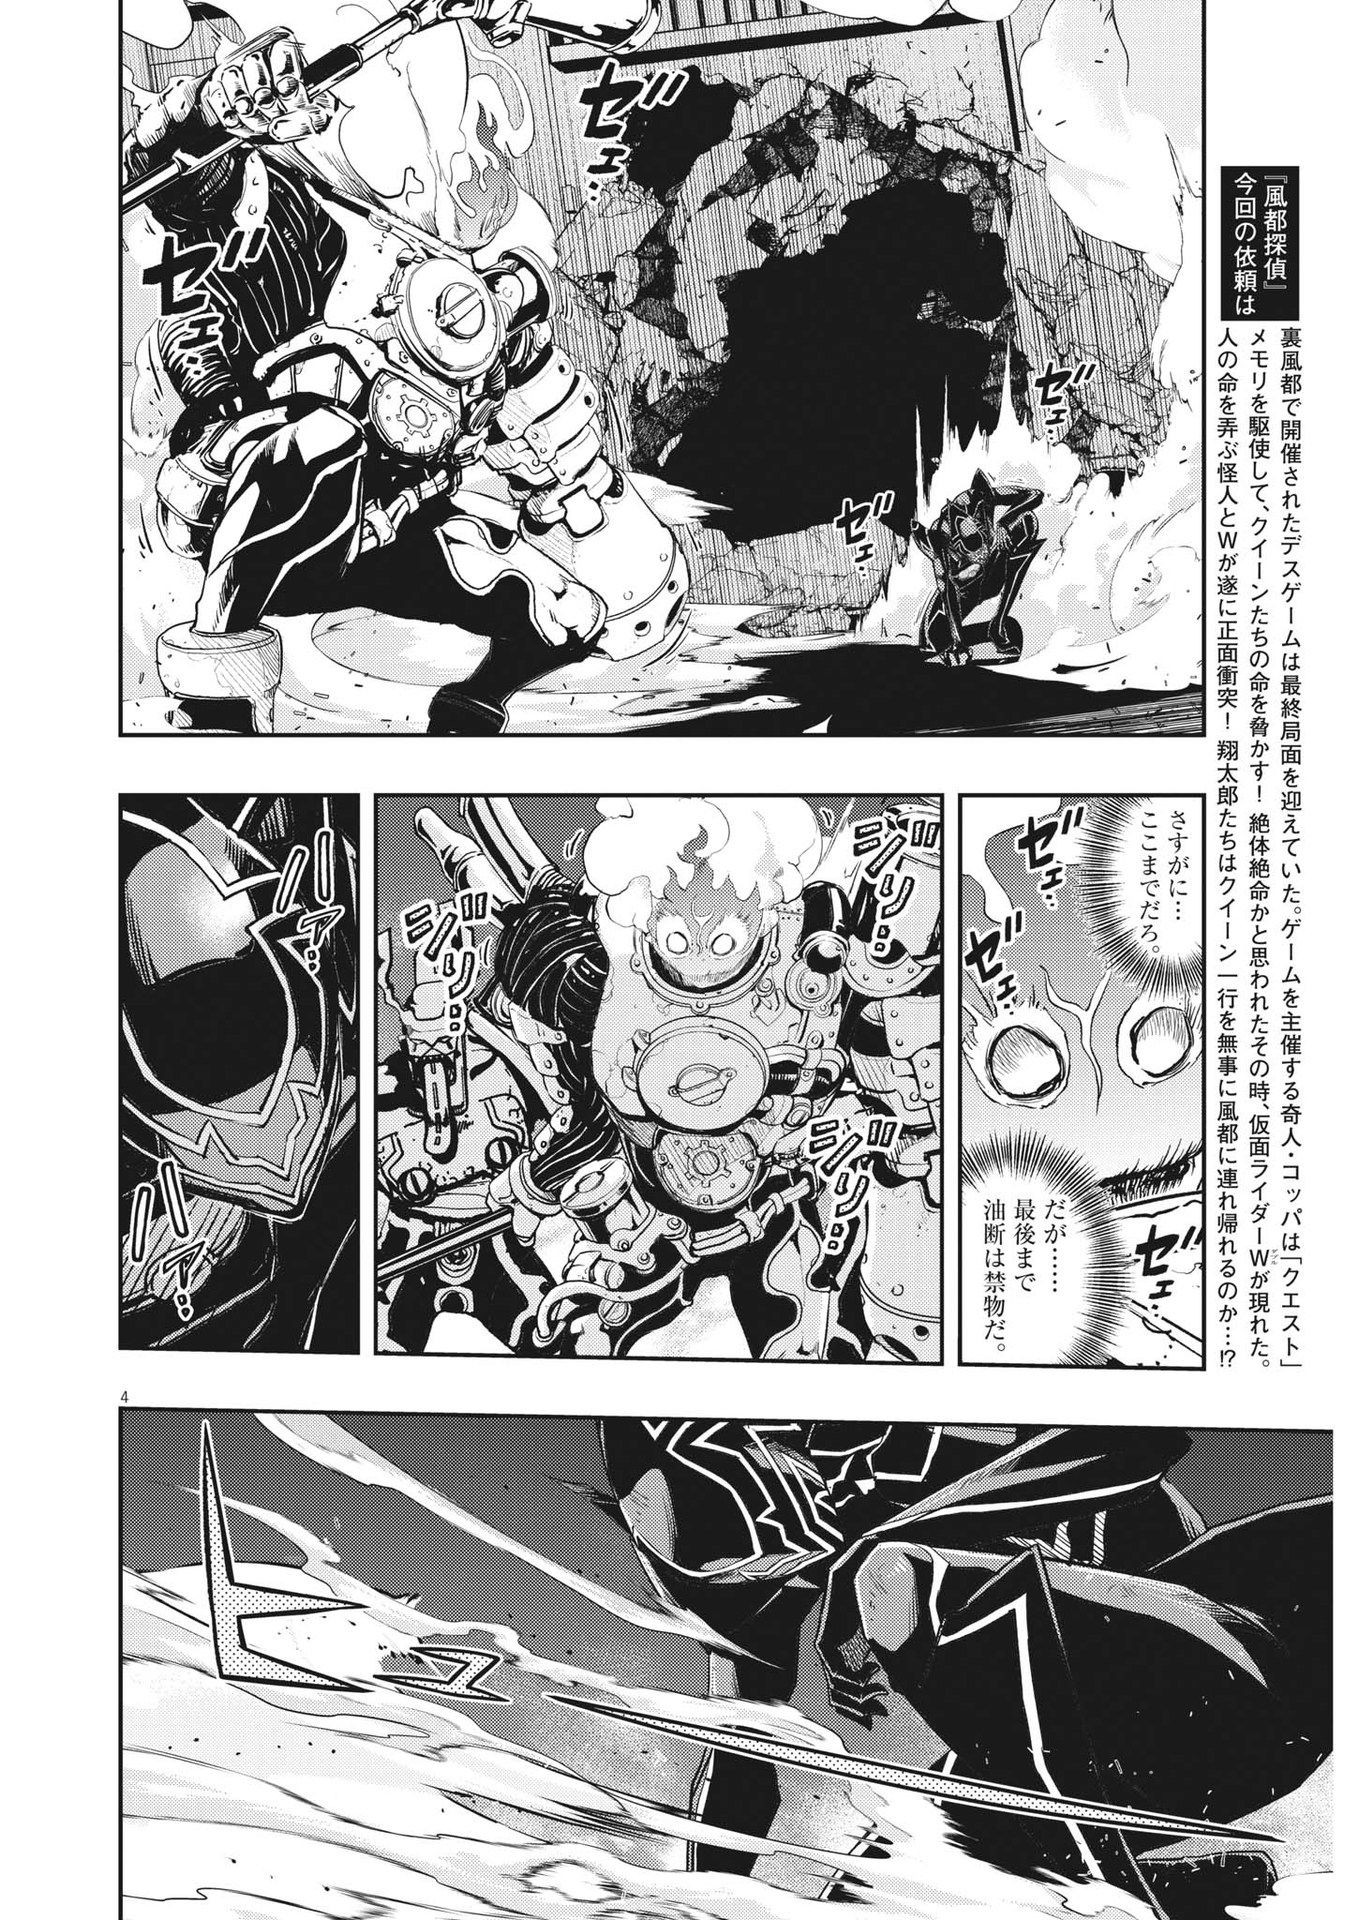 Kamen Rider W: Fuuto Tantei - Chapter 142 - Page 4